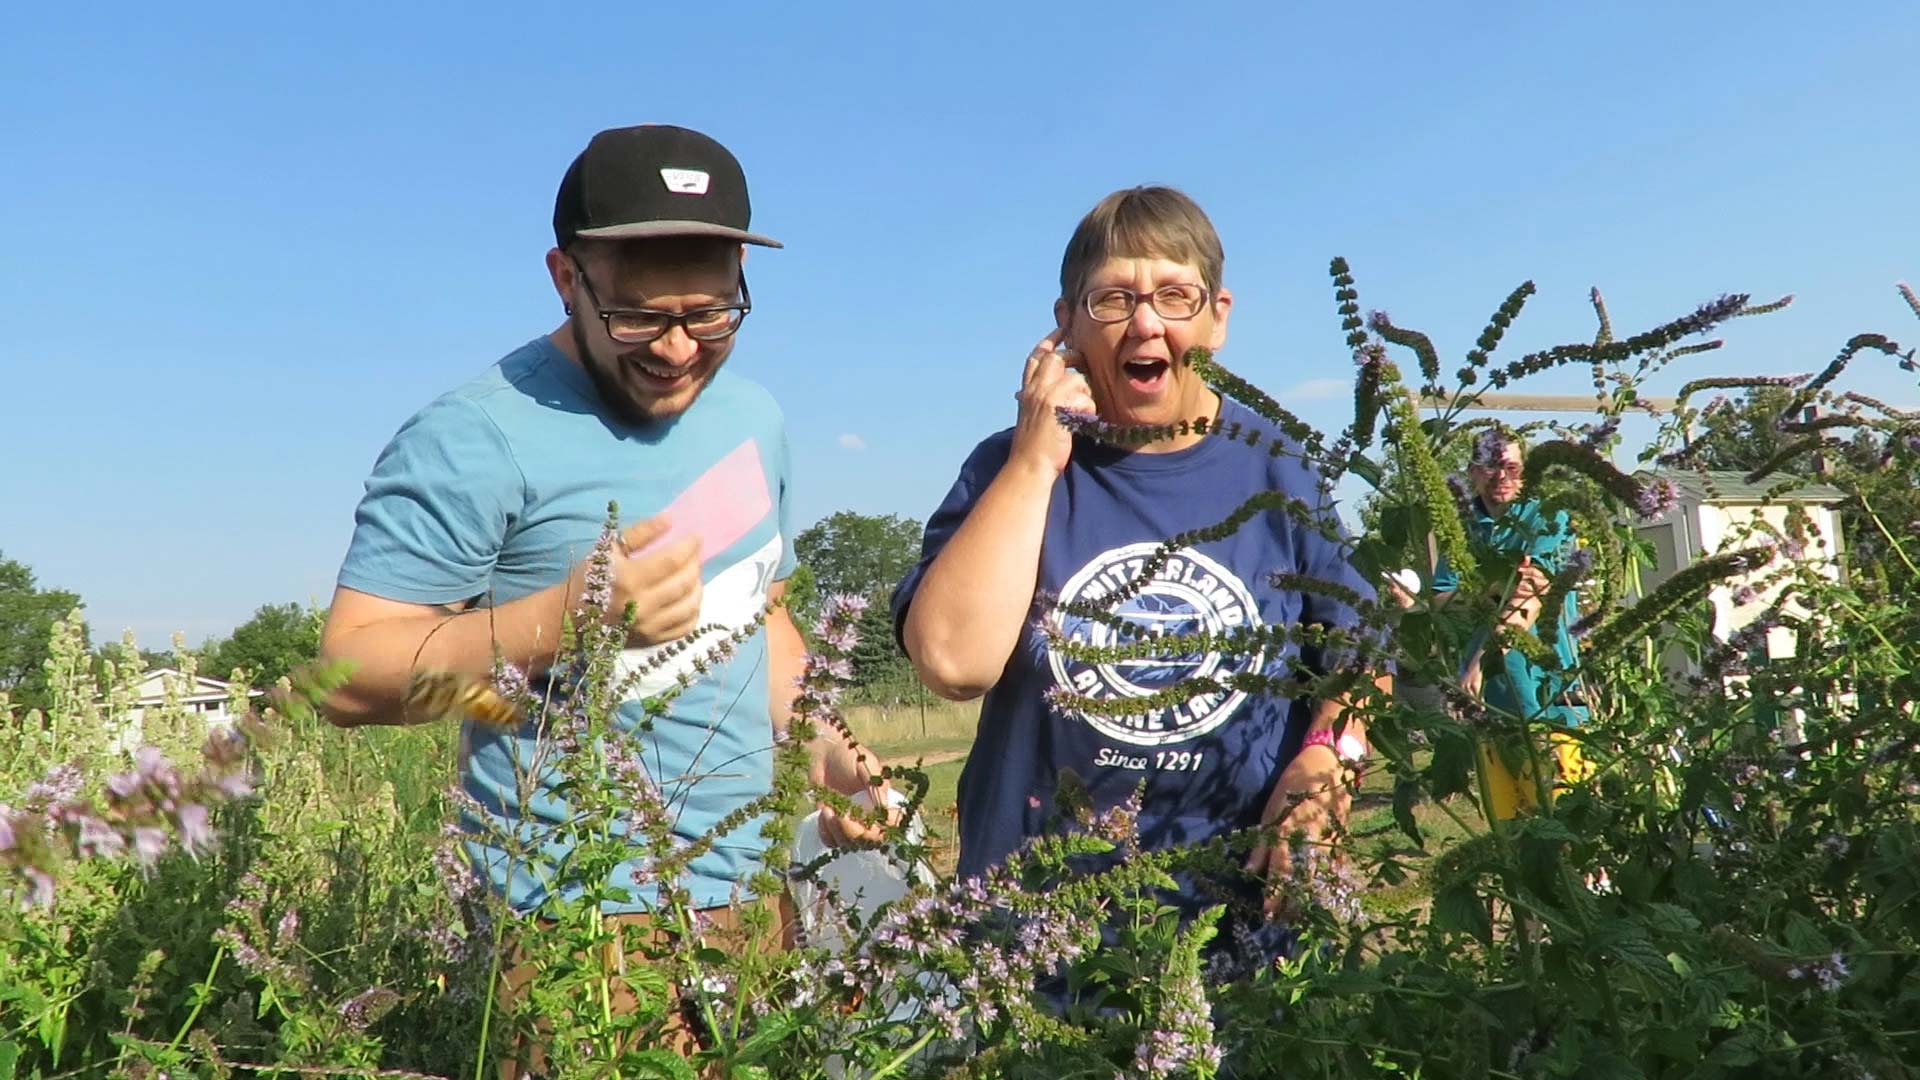 Adults with disabilities outdoors in a field having fun.